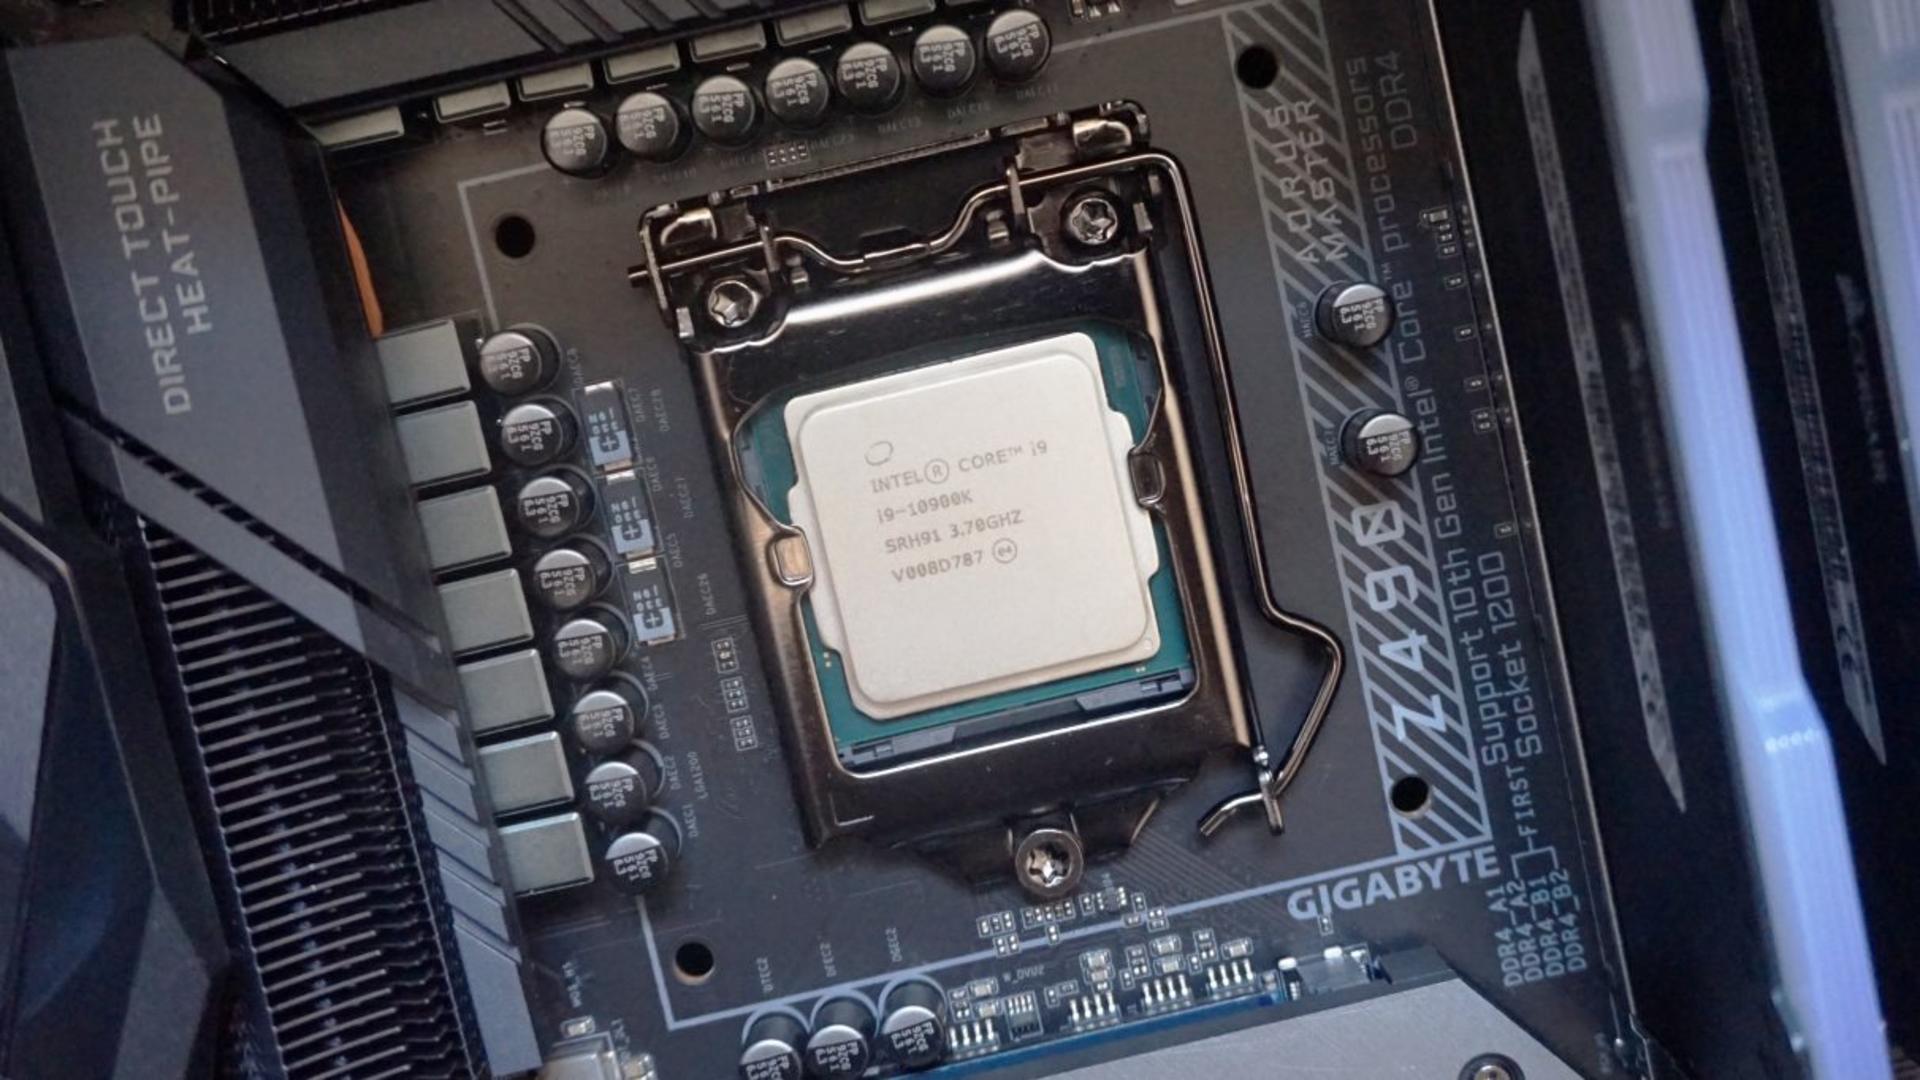 Intel announces release of Core i9-10900KS, along with two other new Comet Lake-S processors